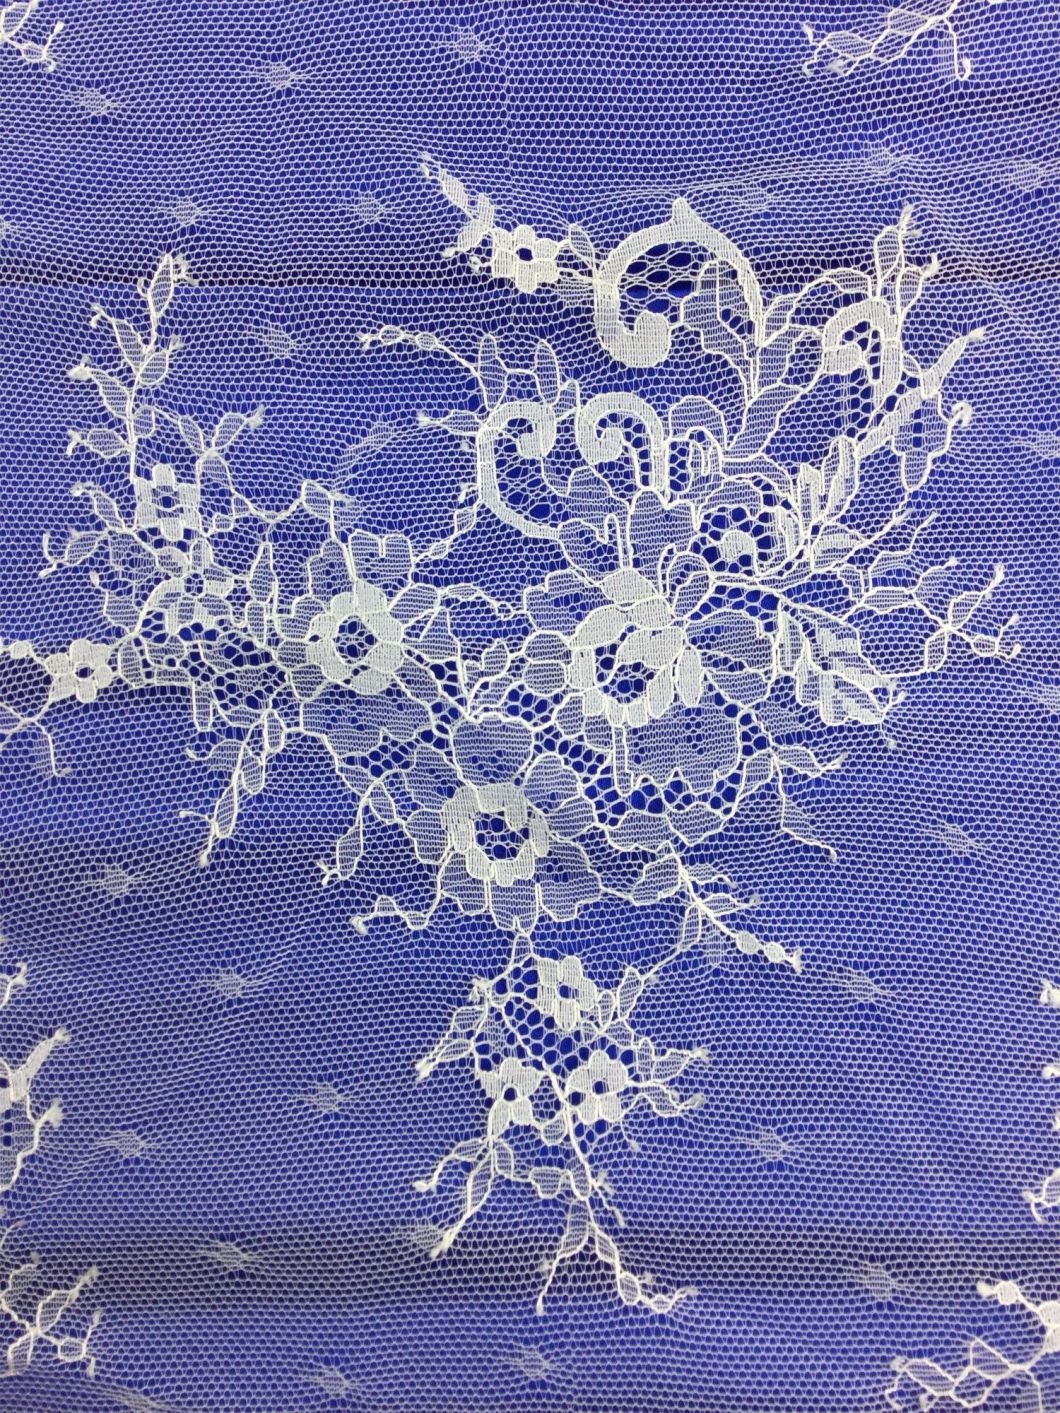 White Embroidery Lace Trim for Wedding Dress